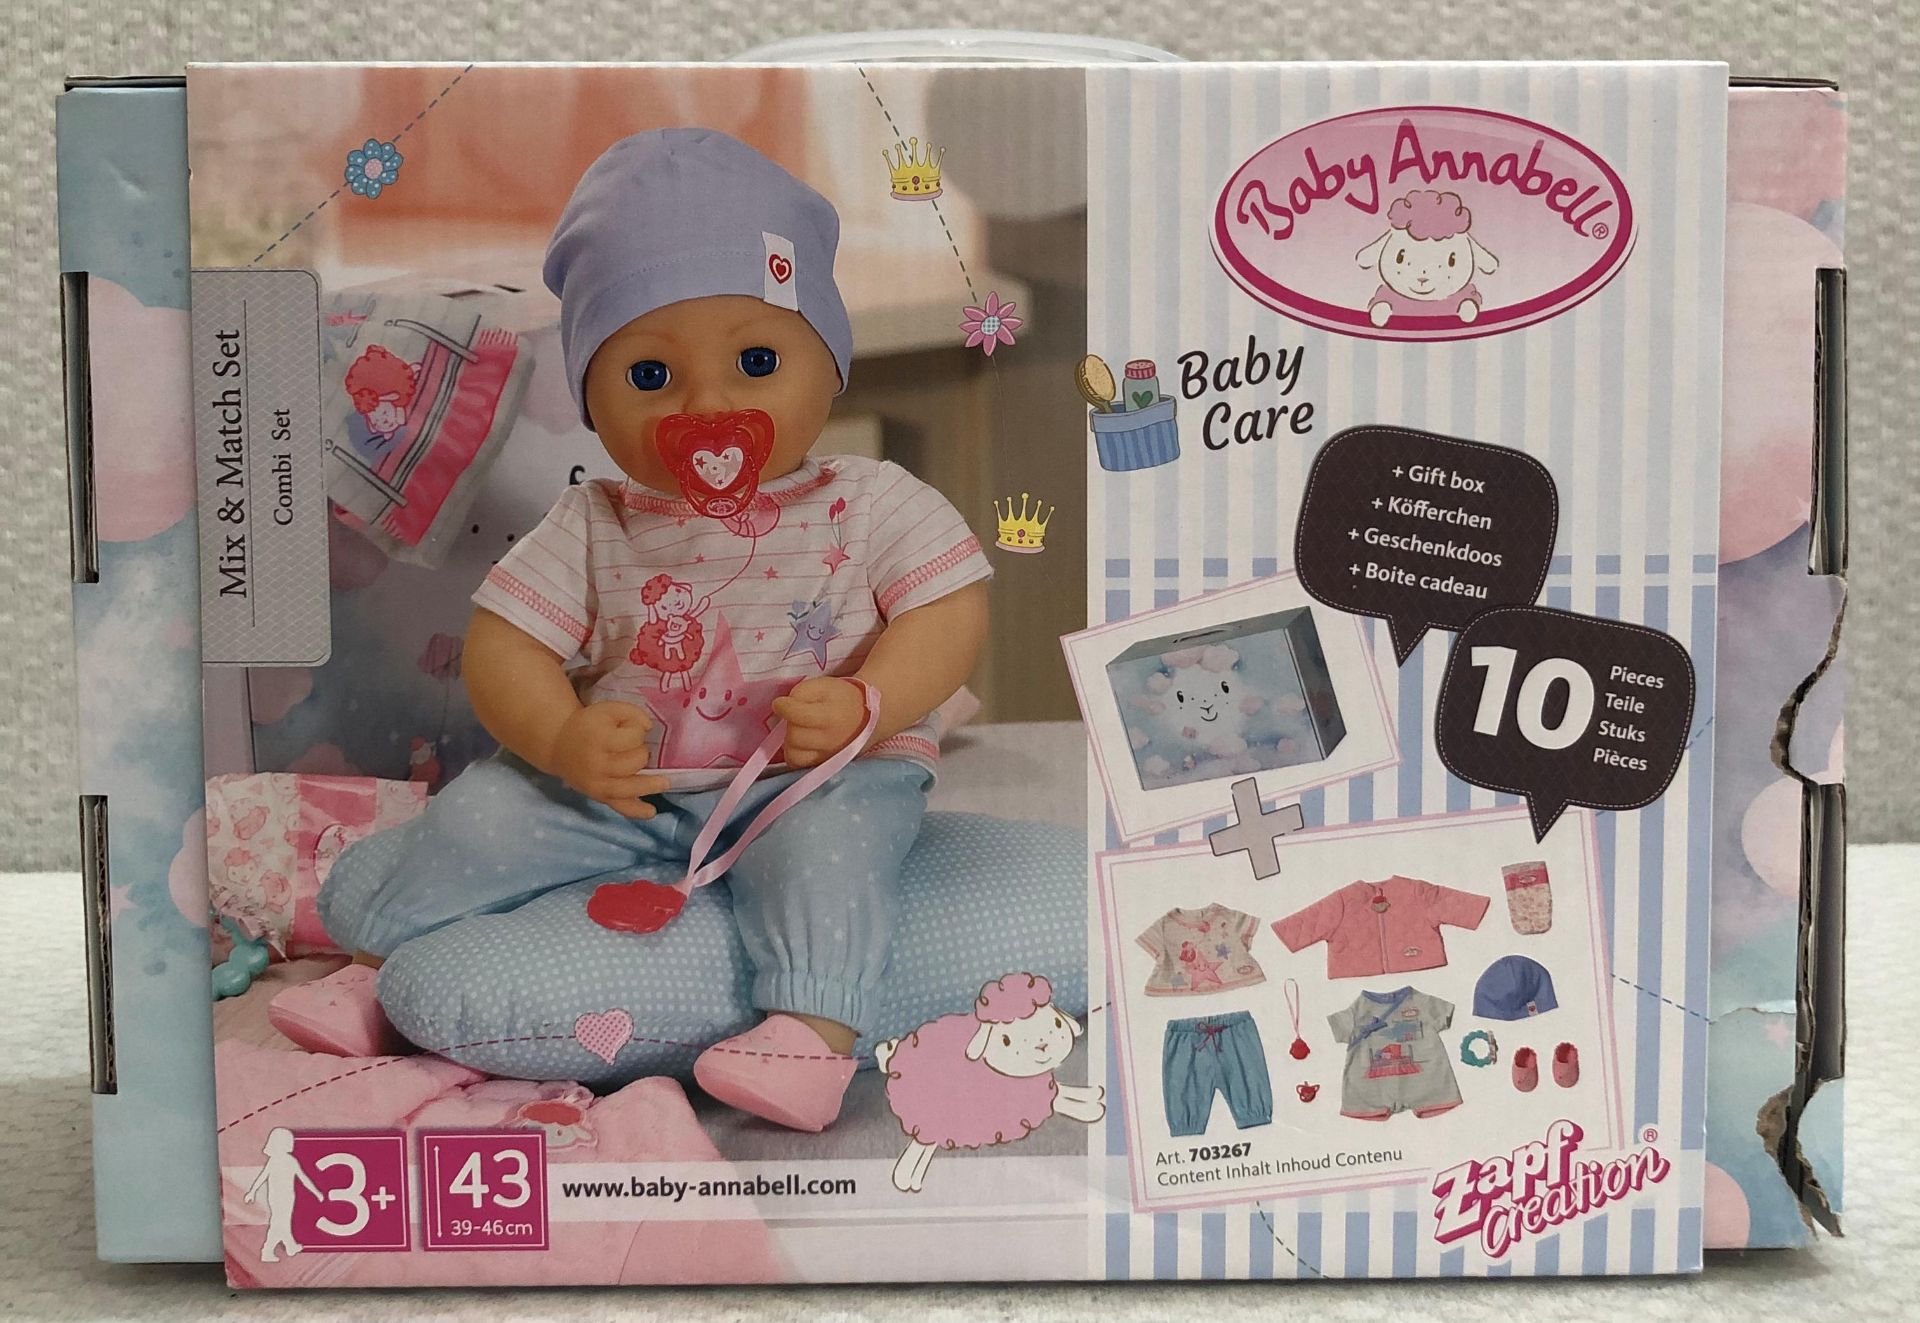 1 x Baby Annabell Baby Mix & Match Combi Set - New/Boxed - HTYS312 - CL987 - Location: Altrincham - Image 2 of 3